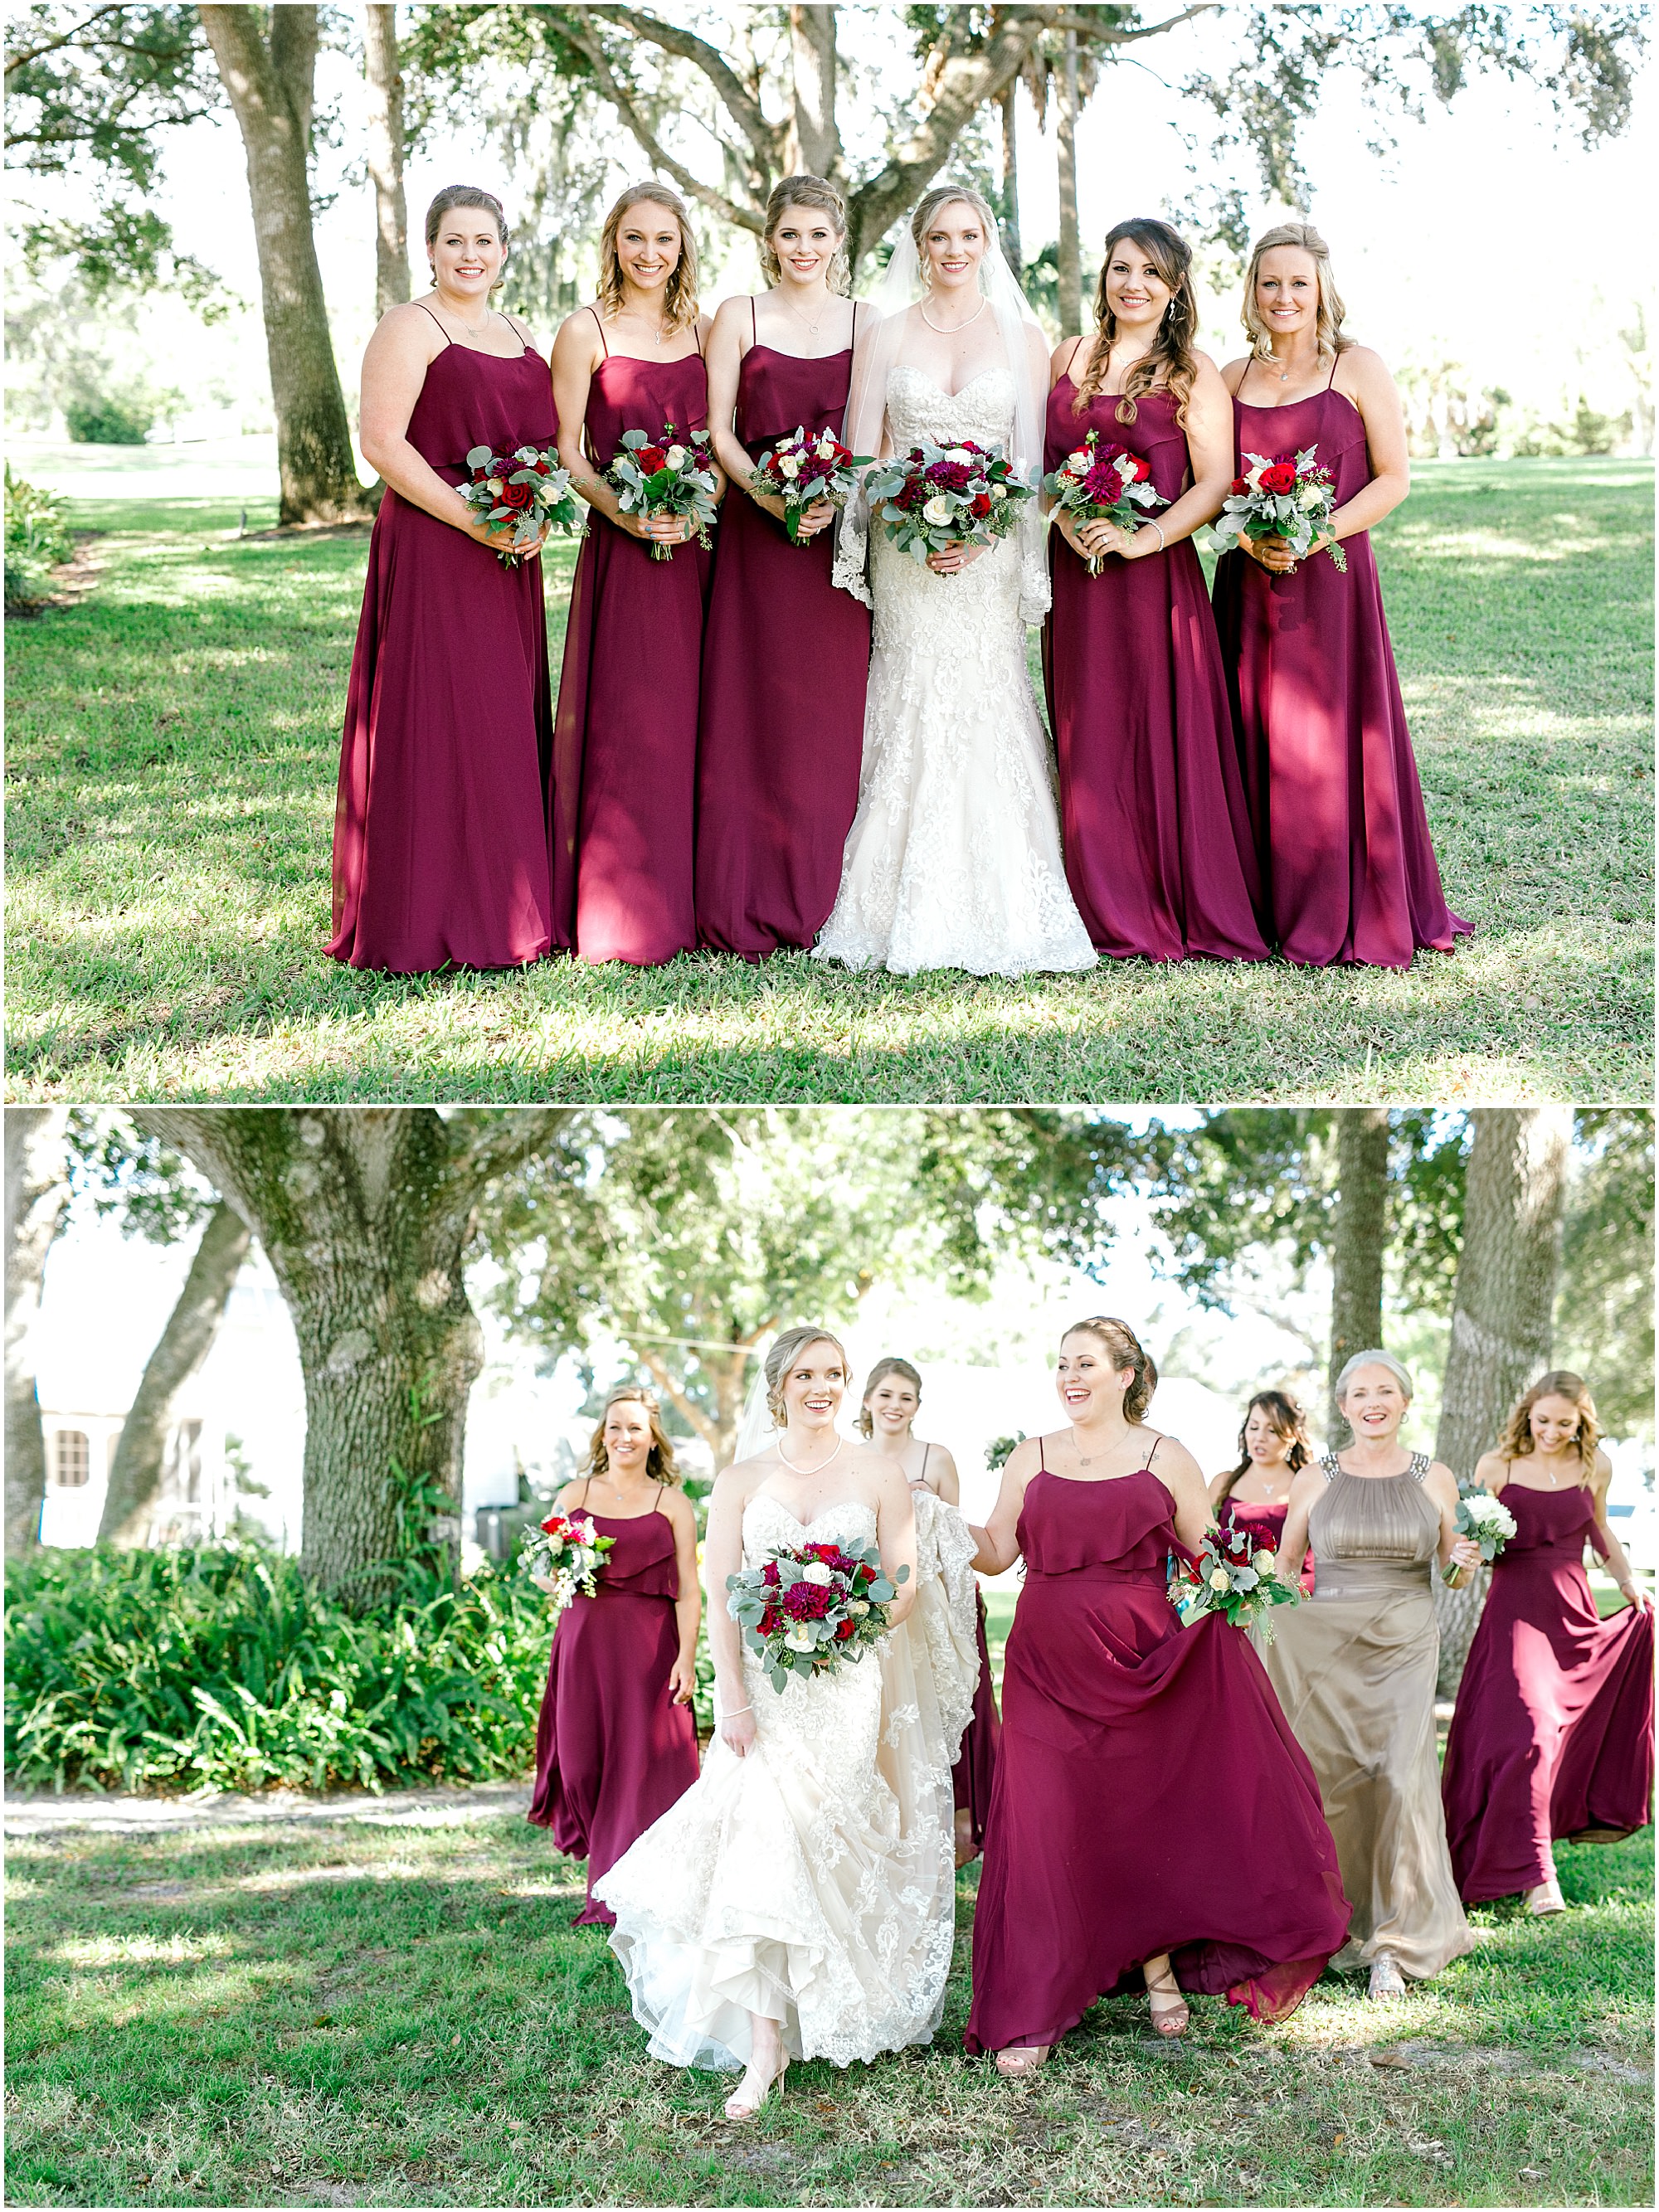 Bridal party walking in the grass and posing for photos